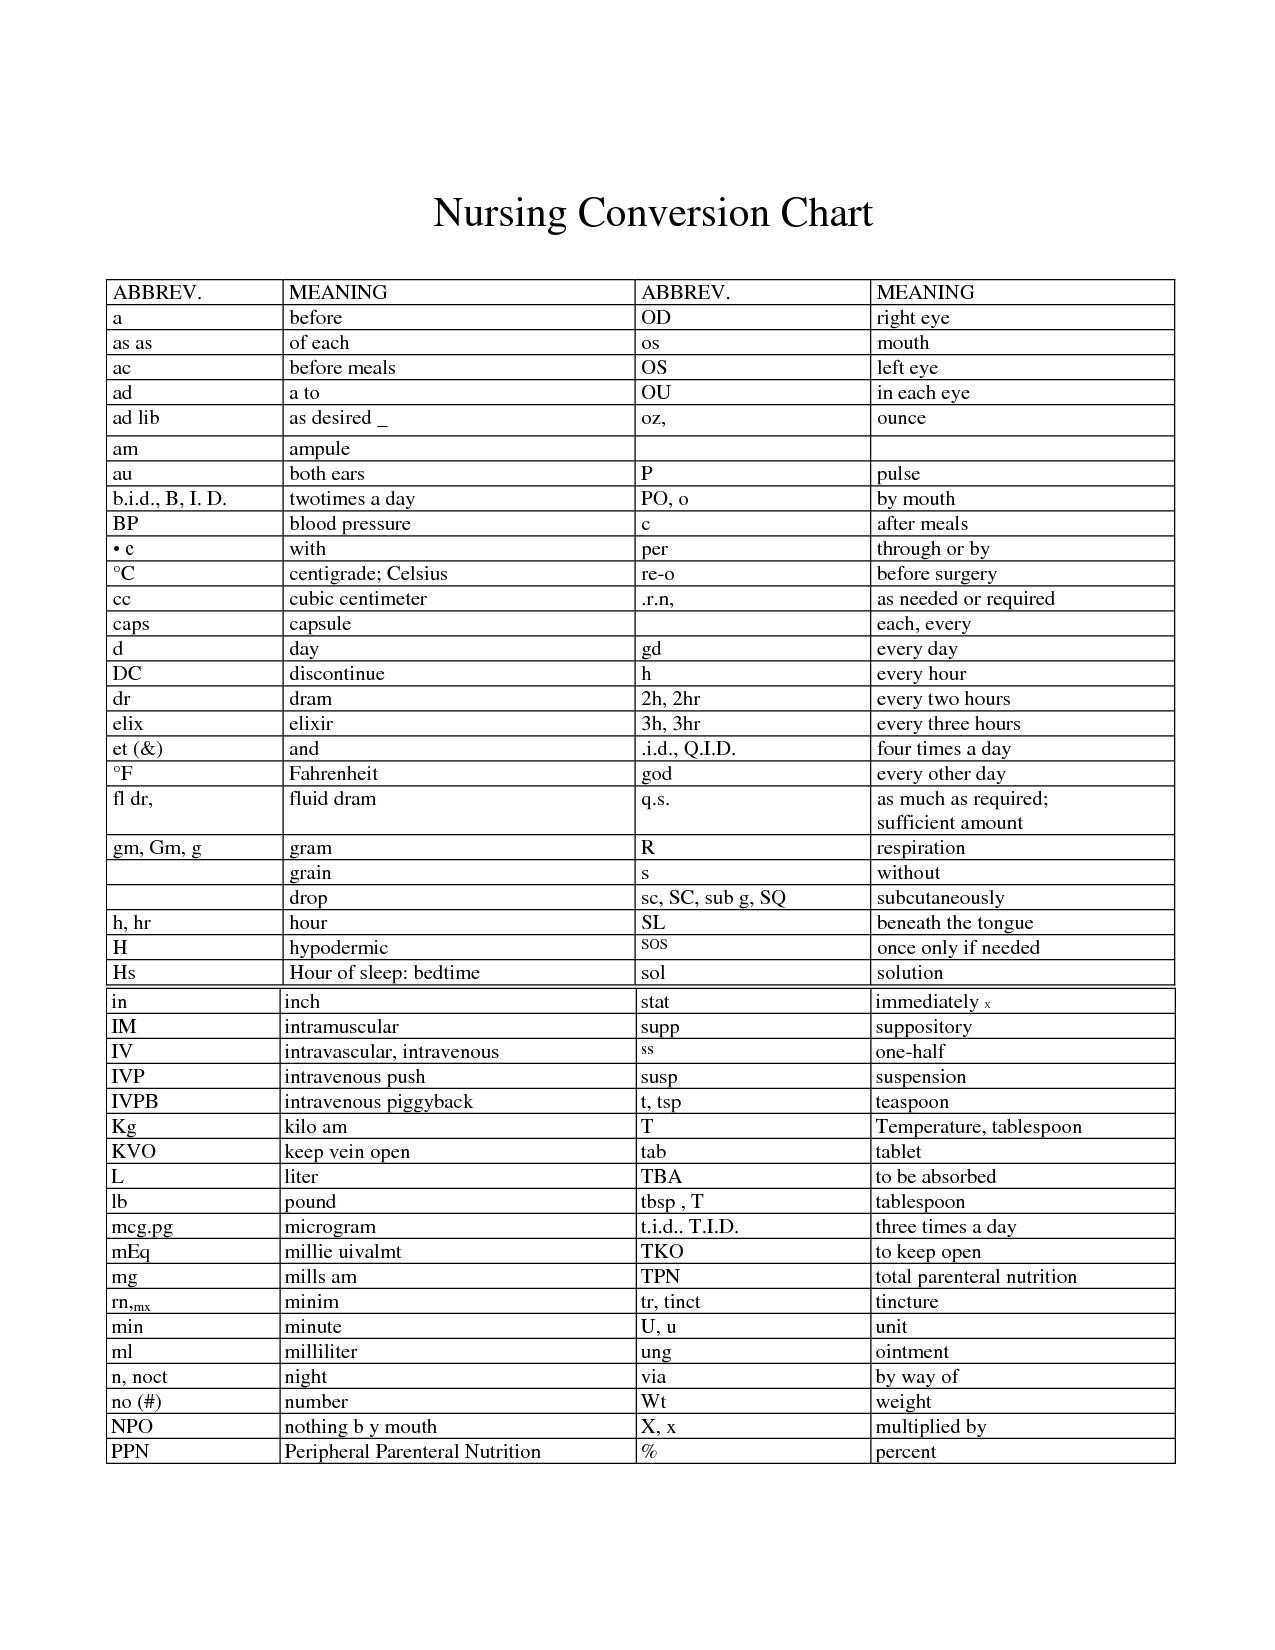 English to Metric Conversion Worksheet with Lovely Metric Conversion Chart Mg to Ml Chart